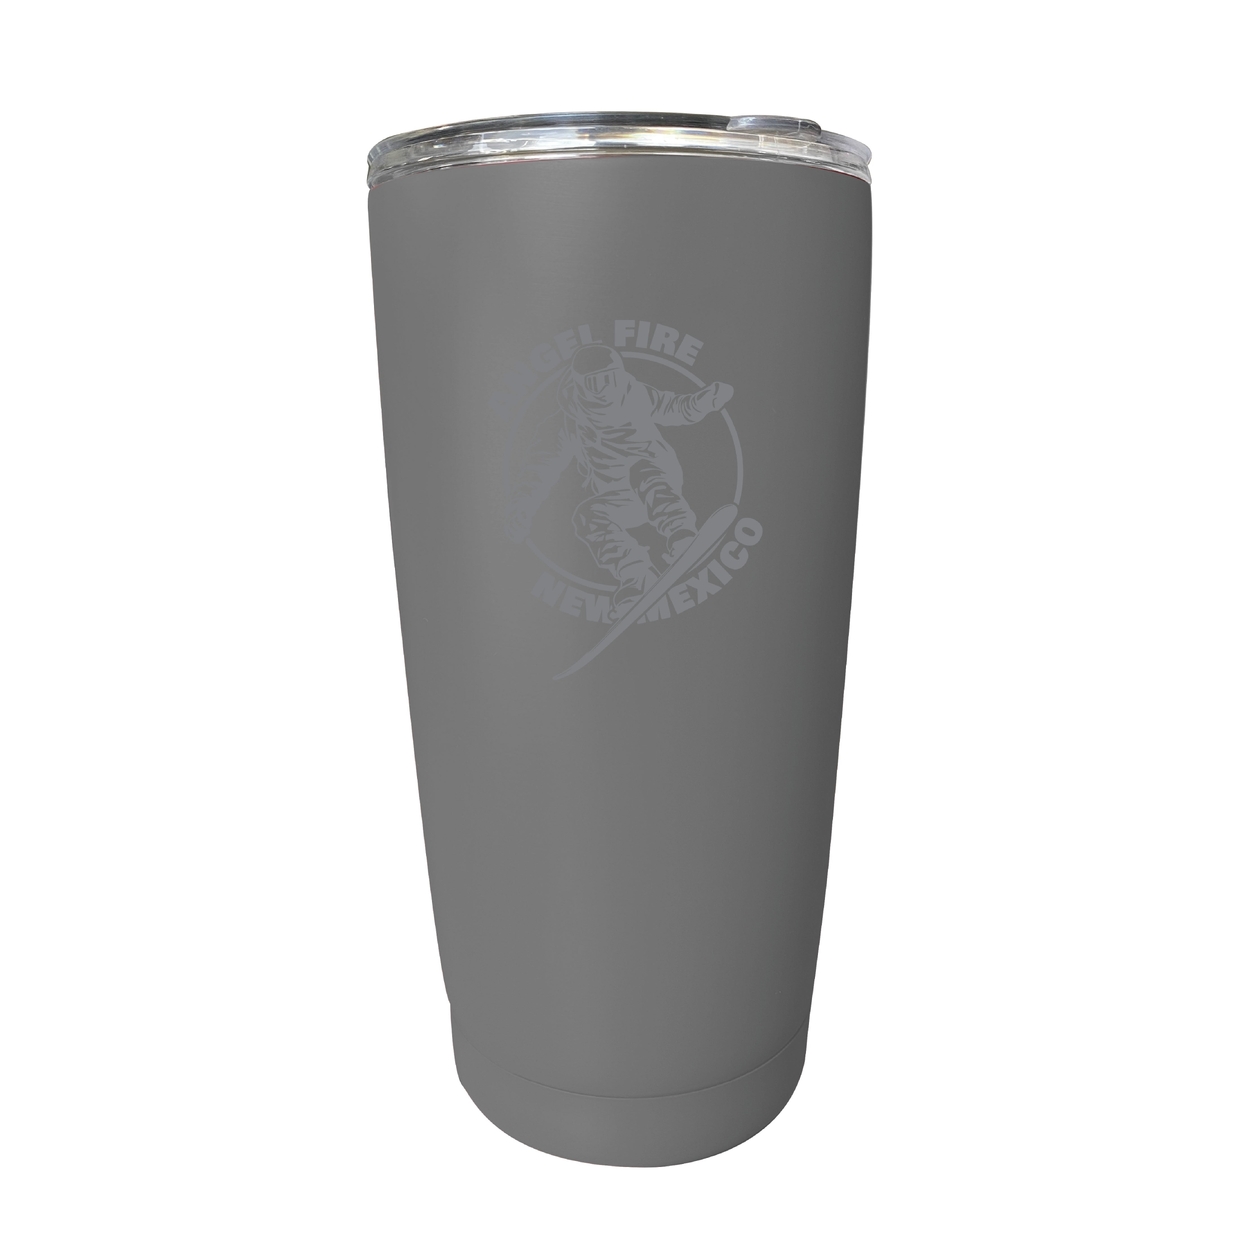 Angel Fire New Mexico Souvenir 16 Oz Engraved Stainless Steel Insulated Tumbler - Gray,,2-Pack